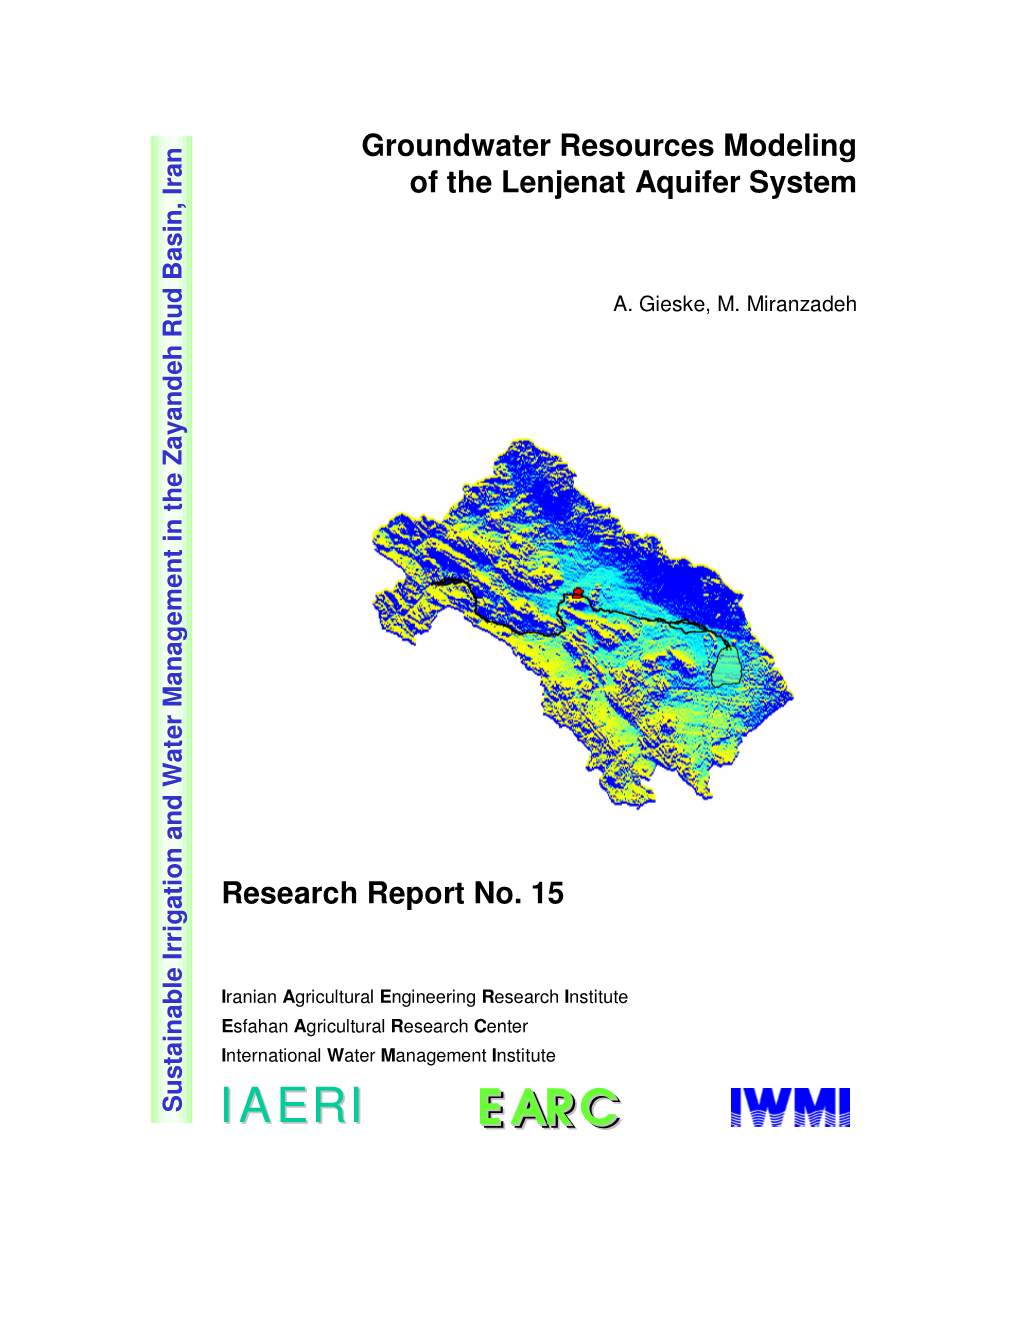 Groundwater Resources Modeling of the Lenjanat Aquifer System